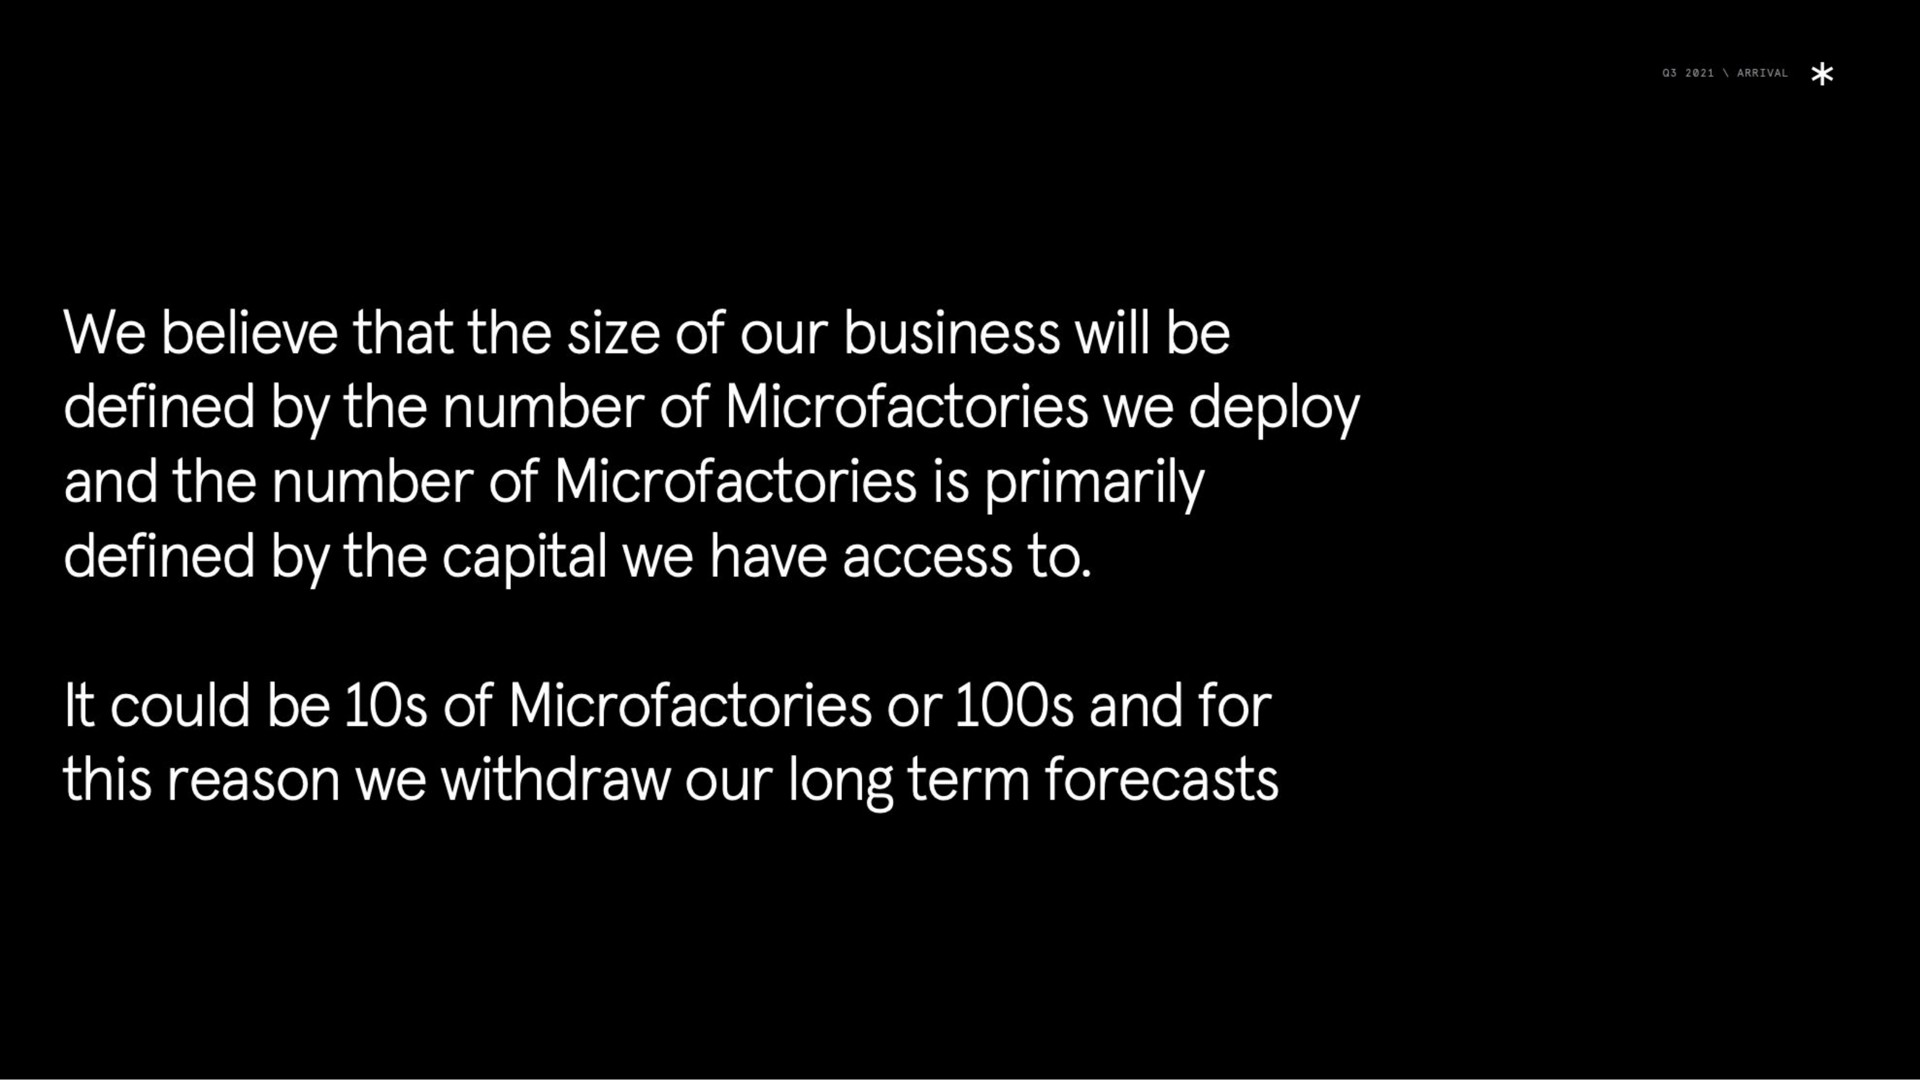 we believe that the size of our business will be defined by the number of we deploy and the number of is primarily defined by the capital we have access to it could be of or and for this reason we withdraw our long term forecasts | Arrival